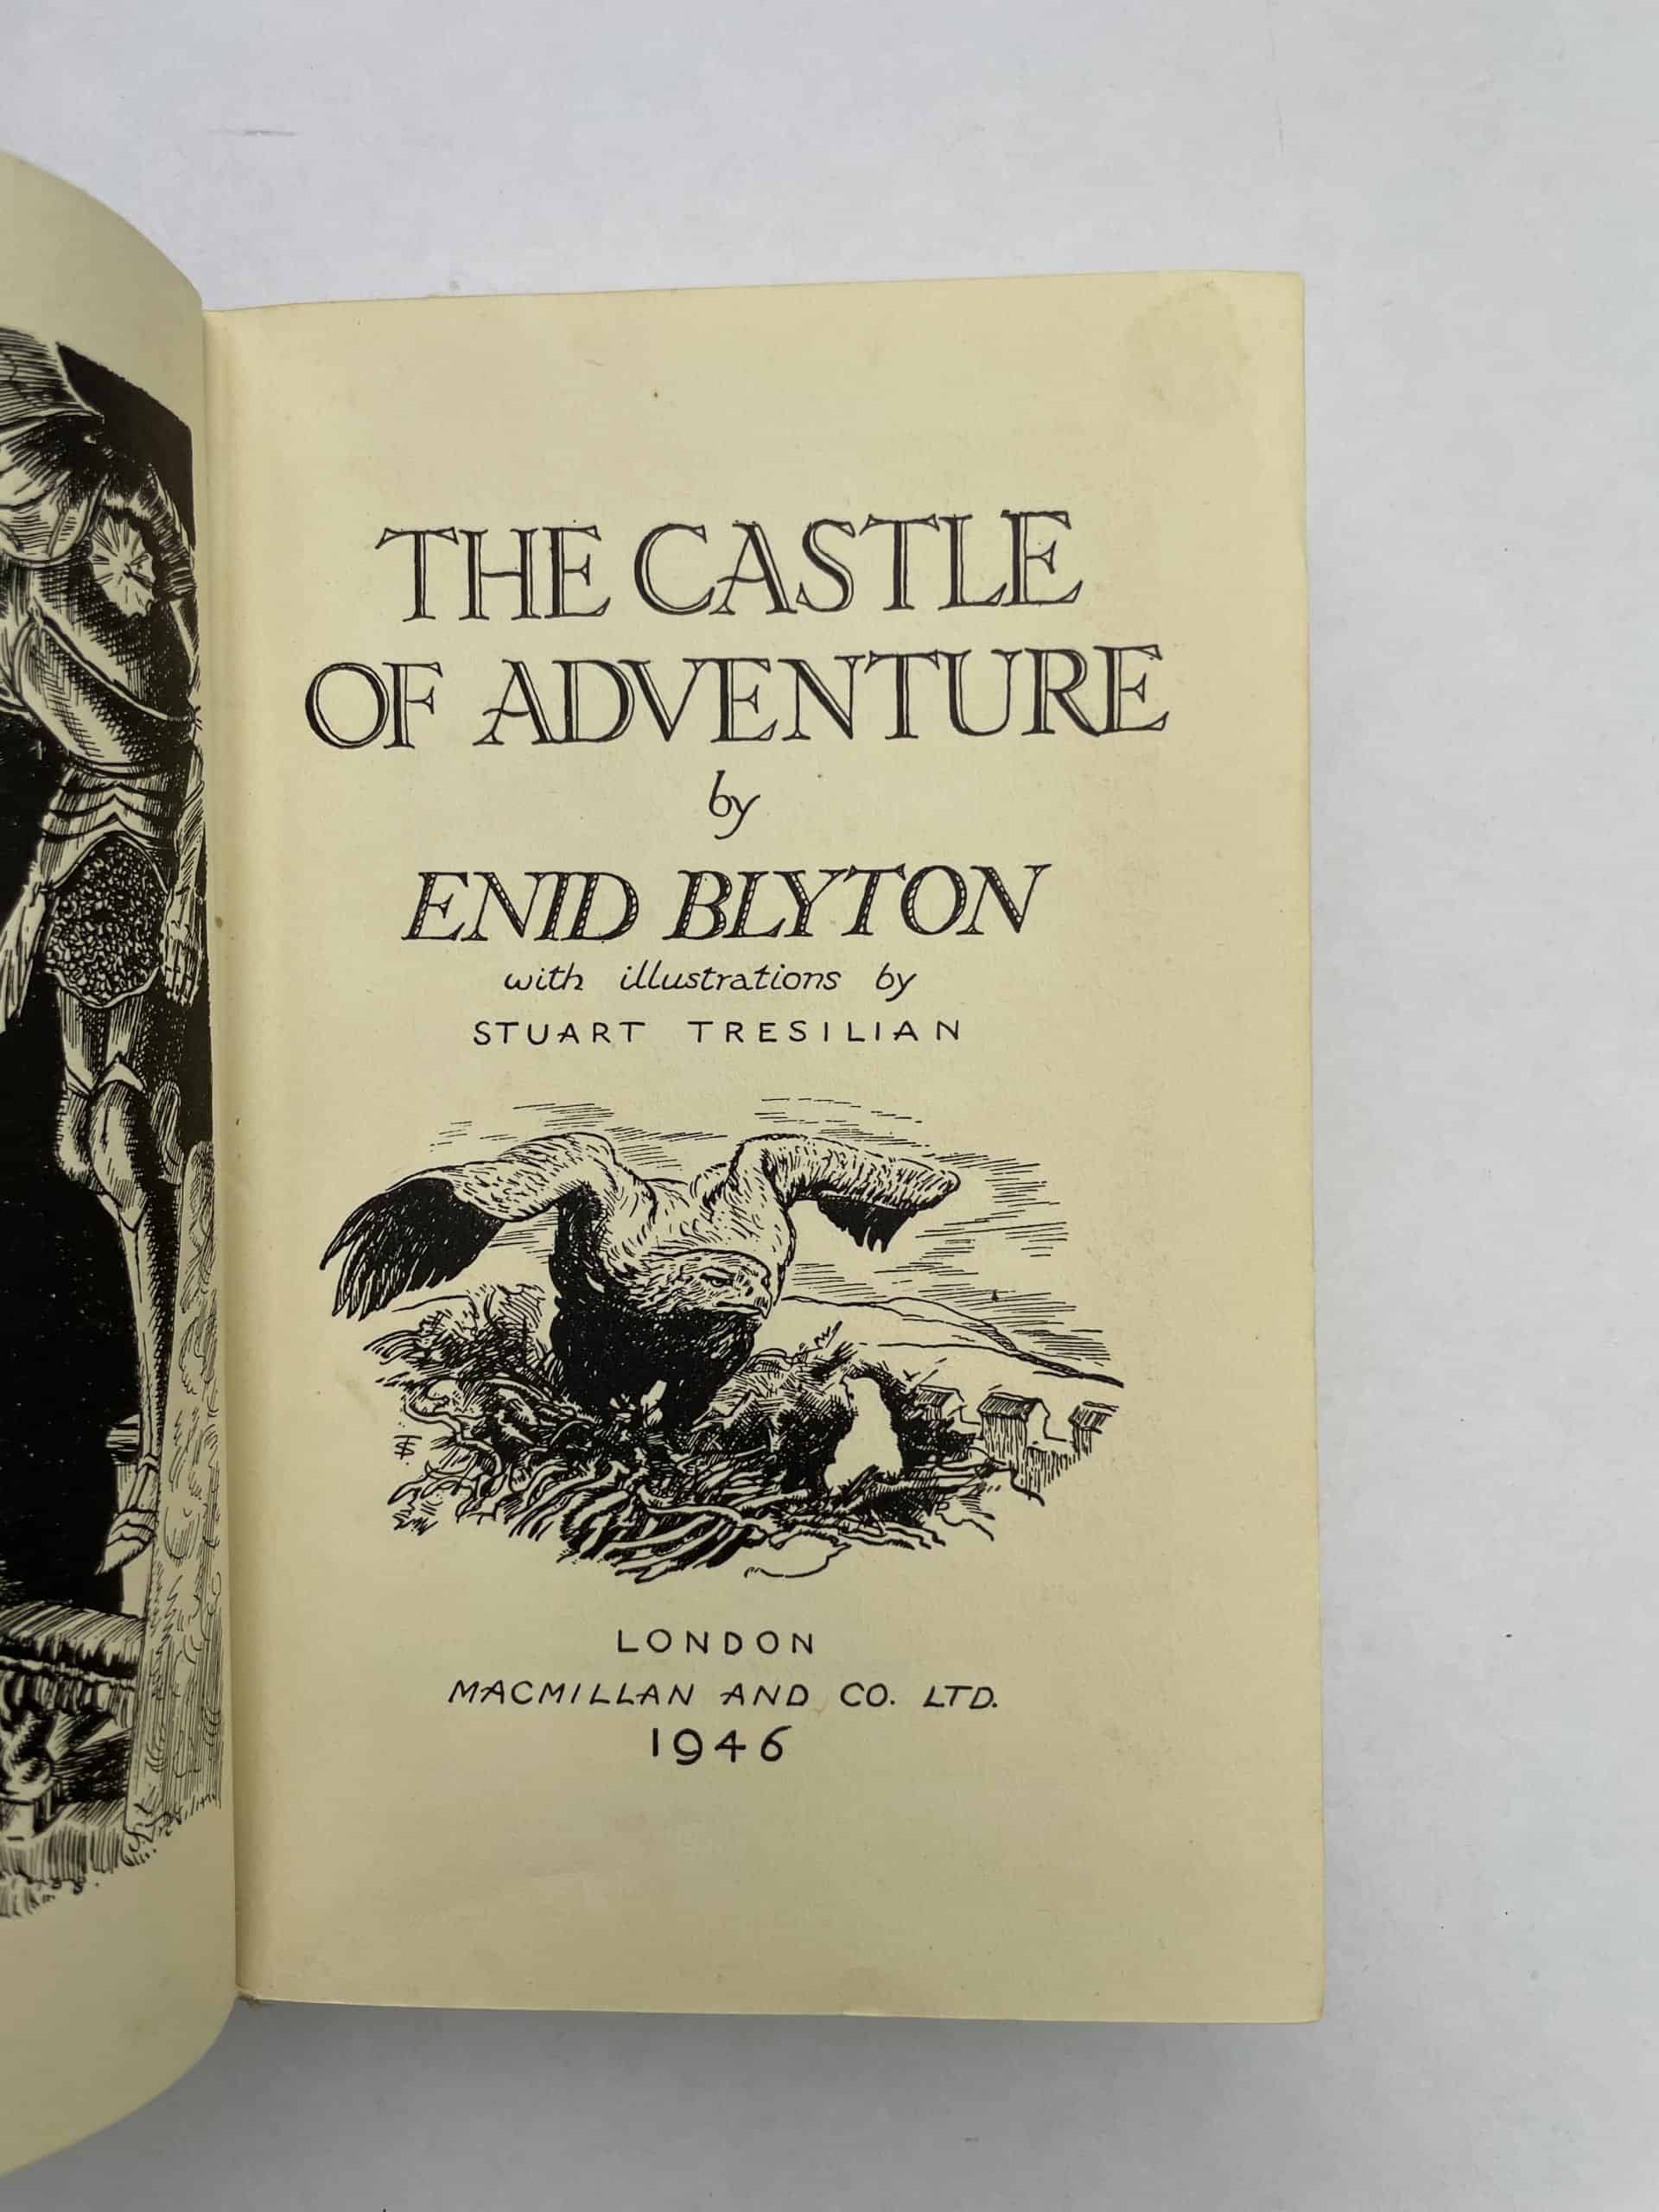 enid blyton the castle of adventure first edition2